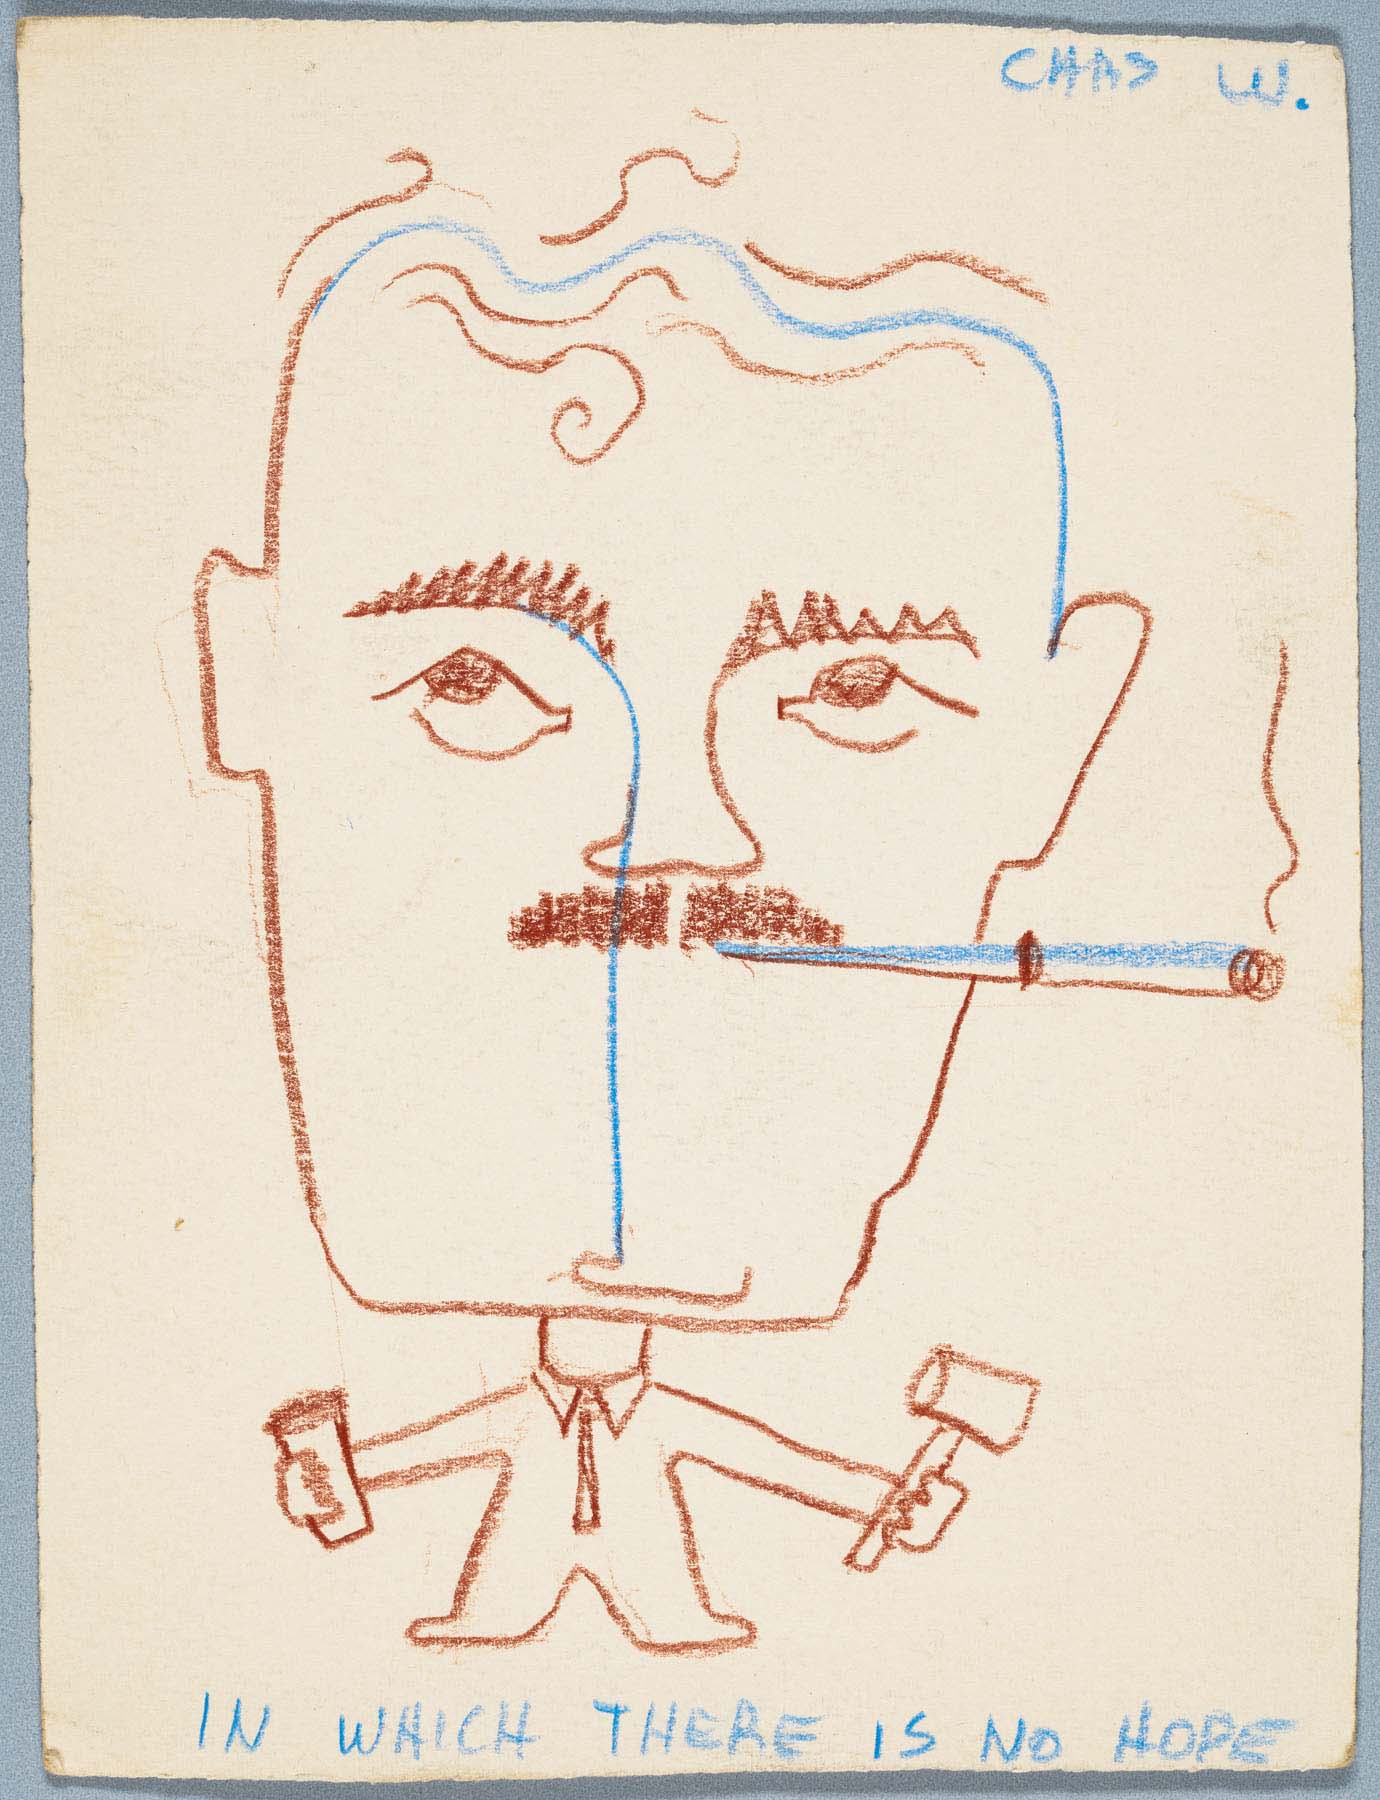 Colored pencil drawing of a moustached man smoking a cigarette and holding a hammer and a cup, standing over the words, “In which there is no hope.”